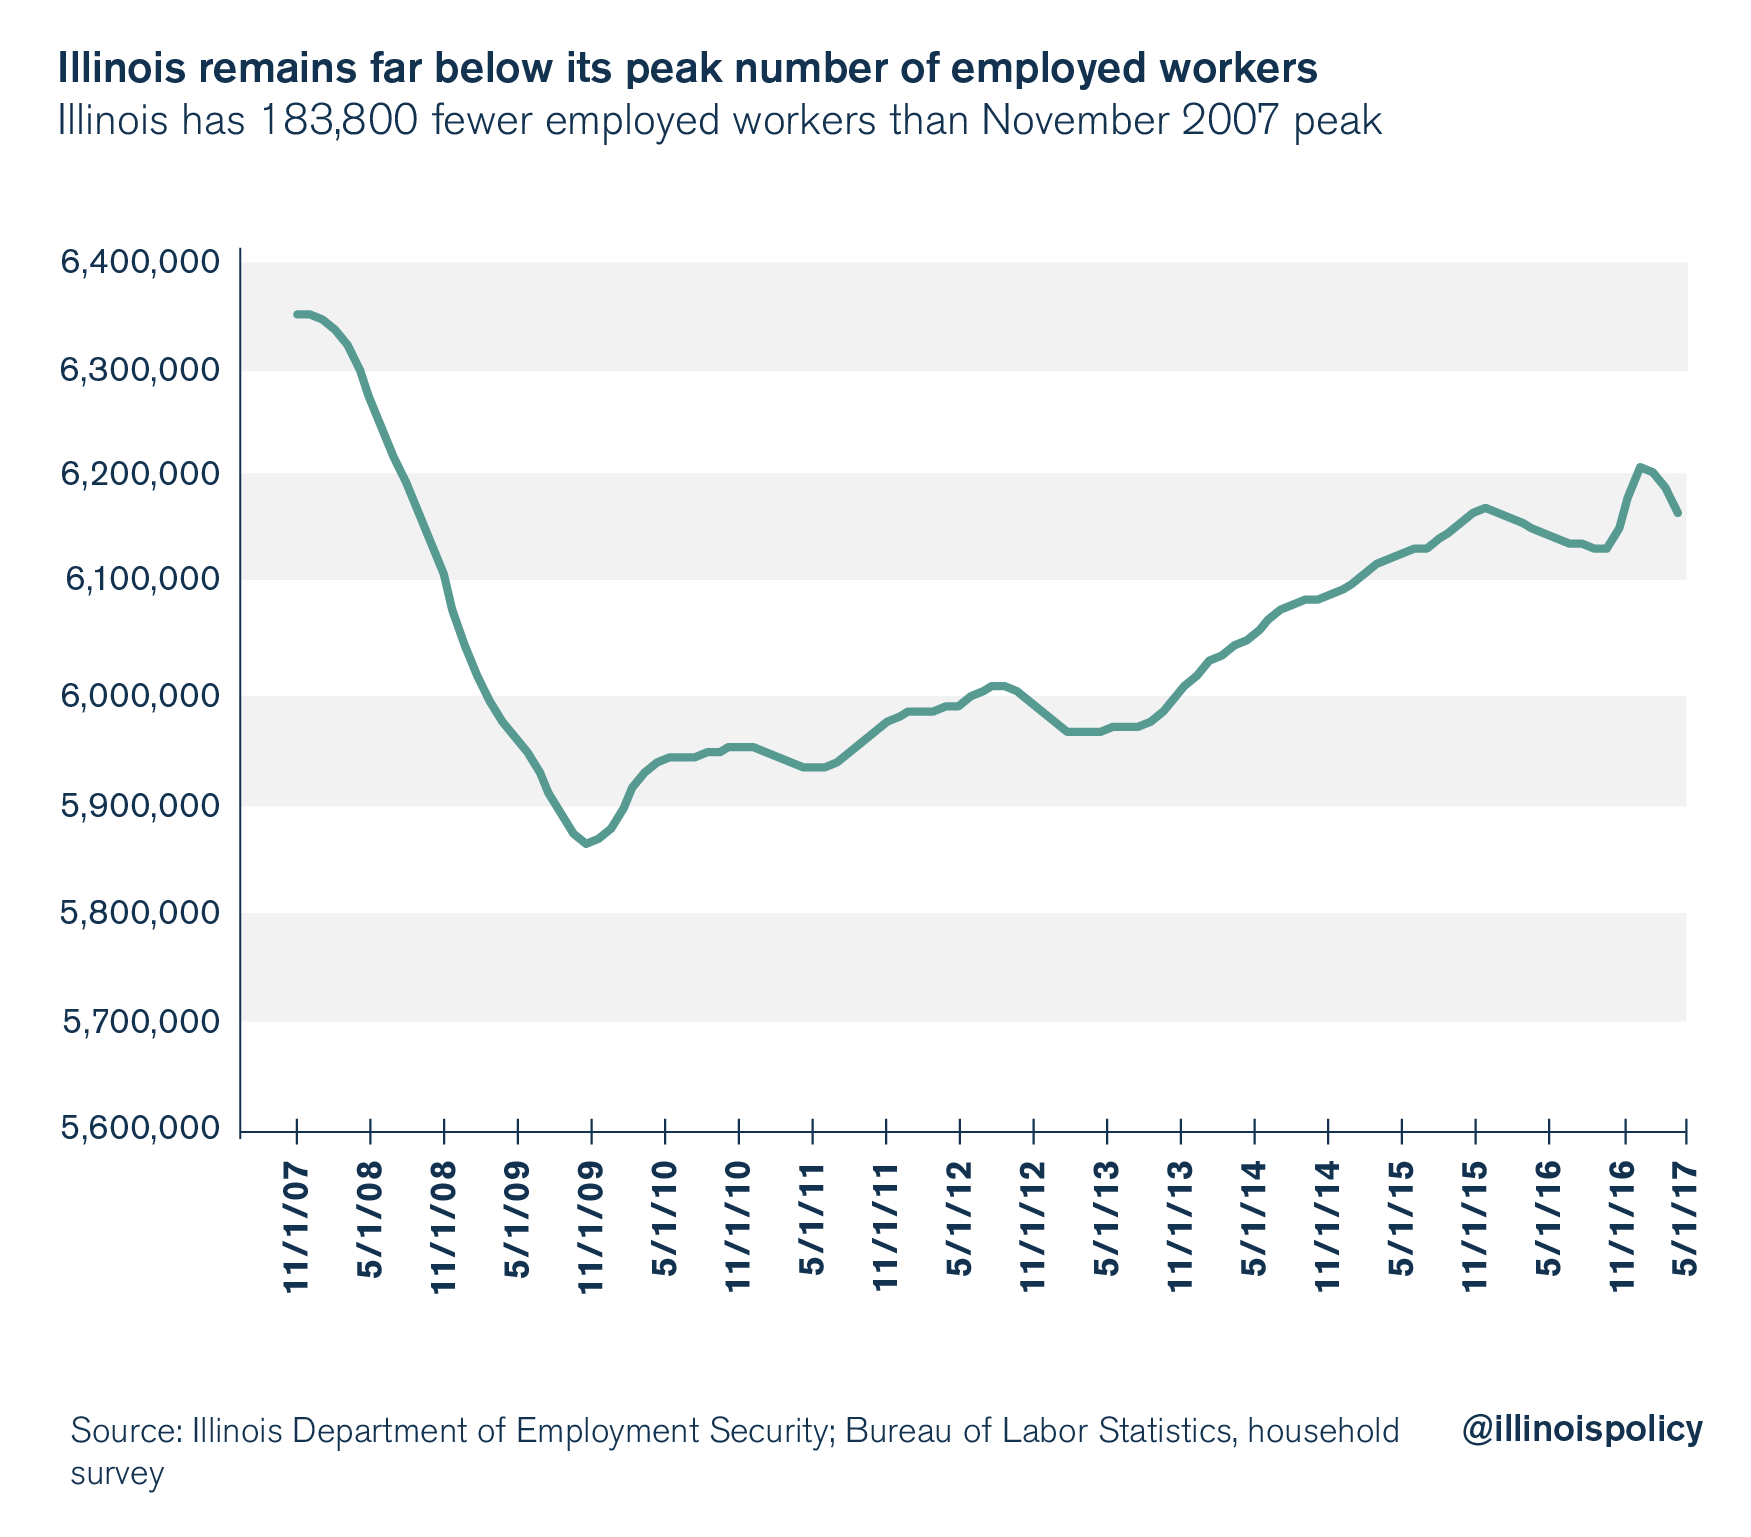 Illinois remains far below its peak number of employed workers